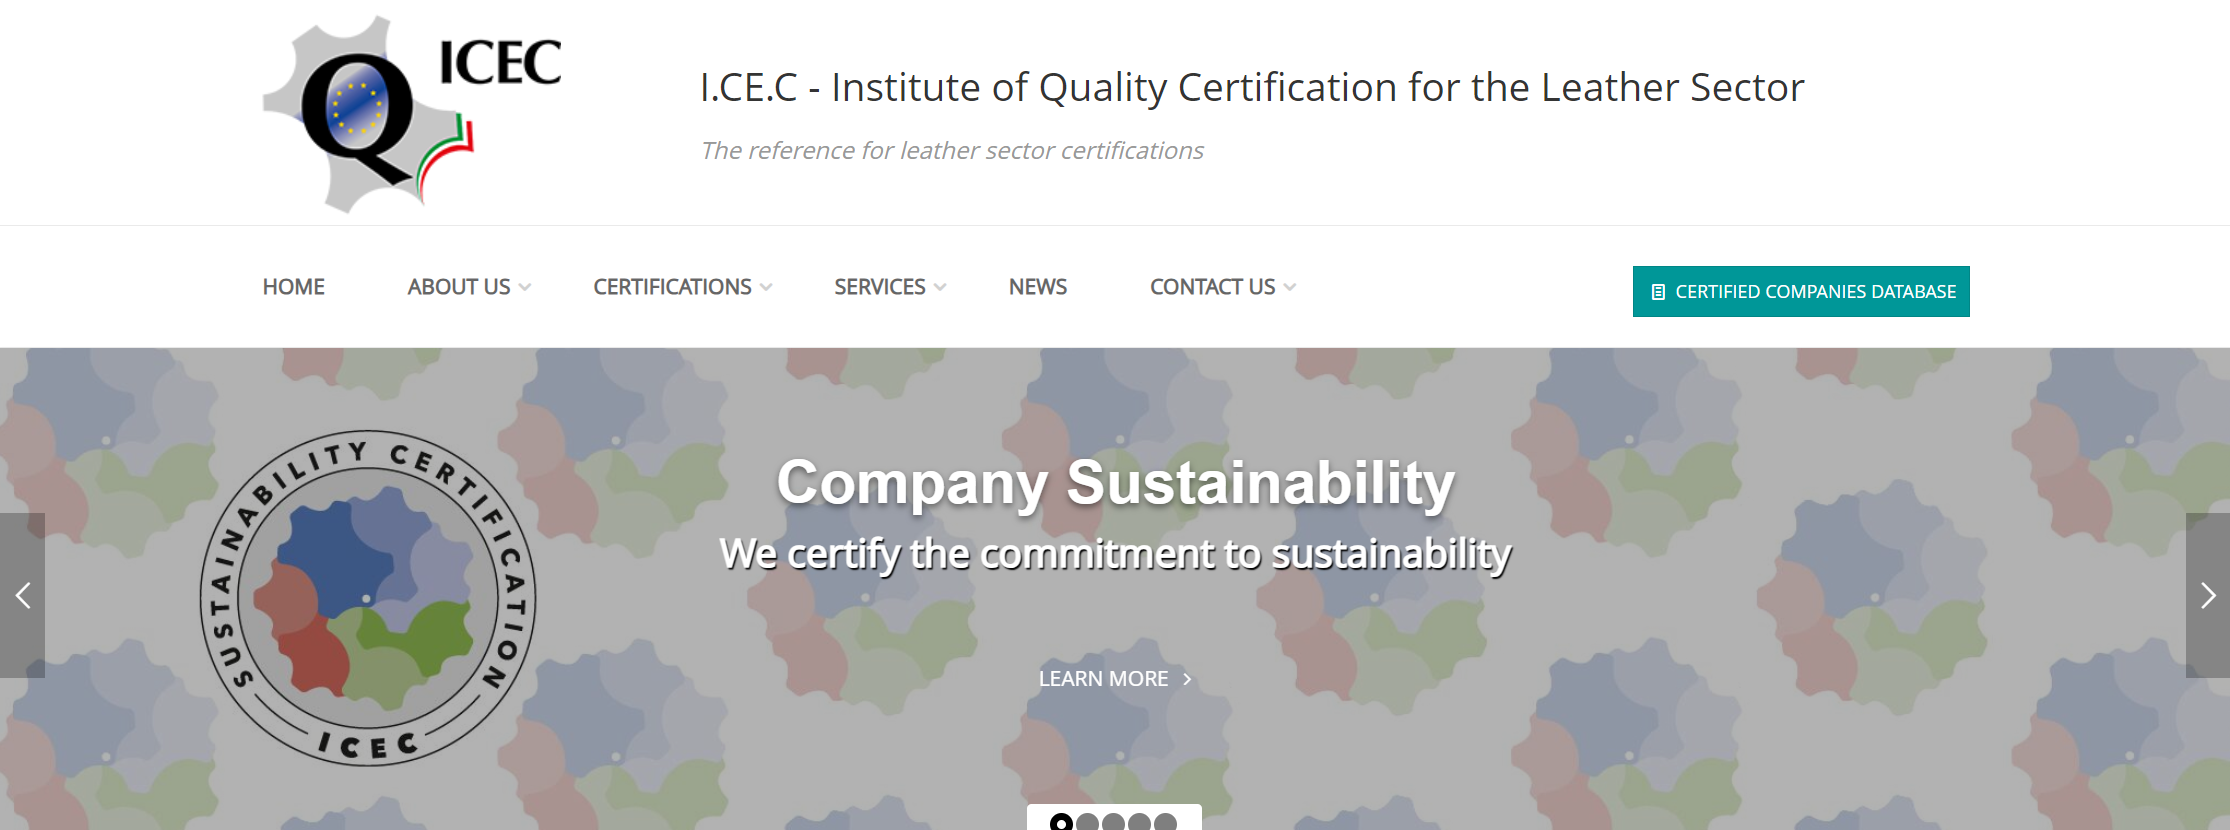 Institute of Quality Certification for the Leather Sector（ICEC）